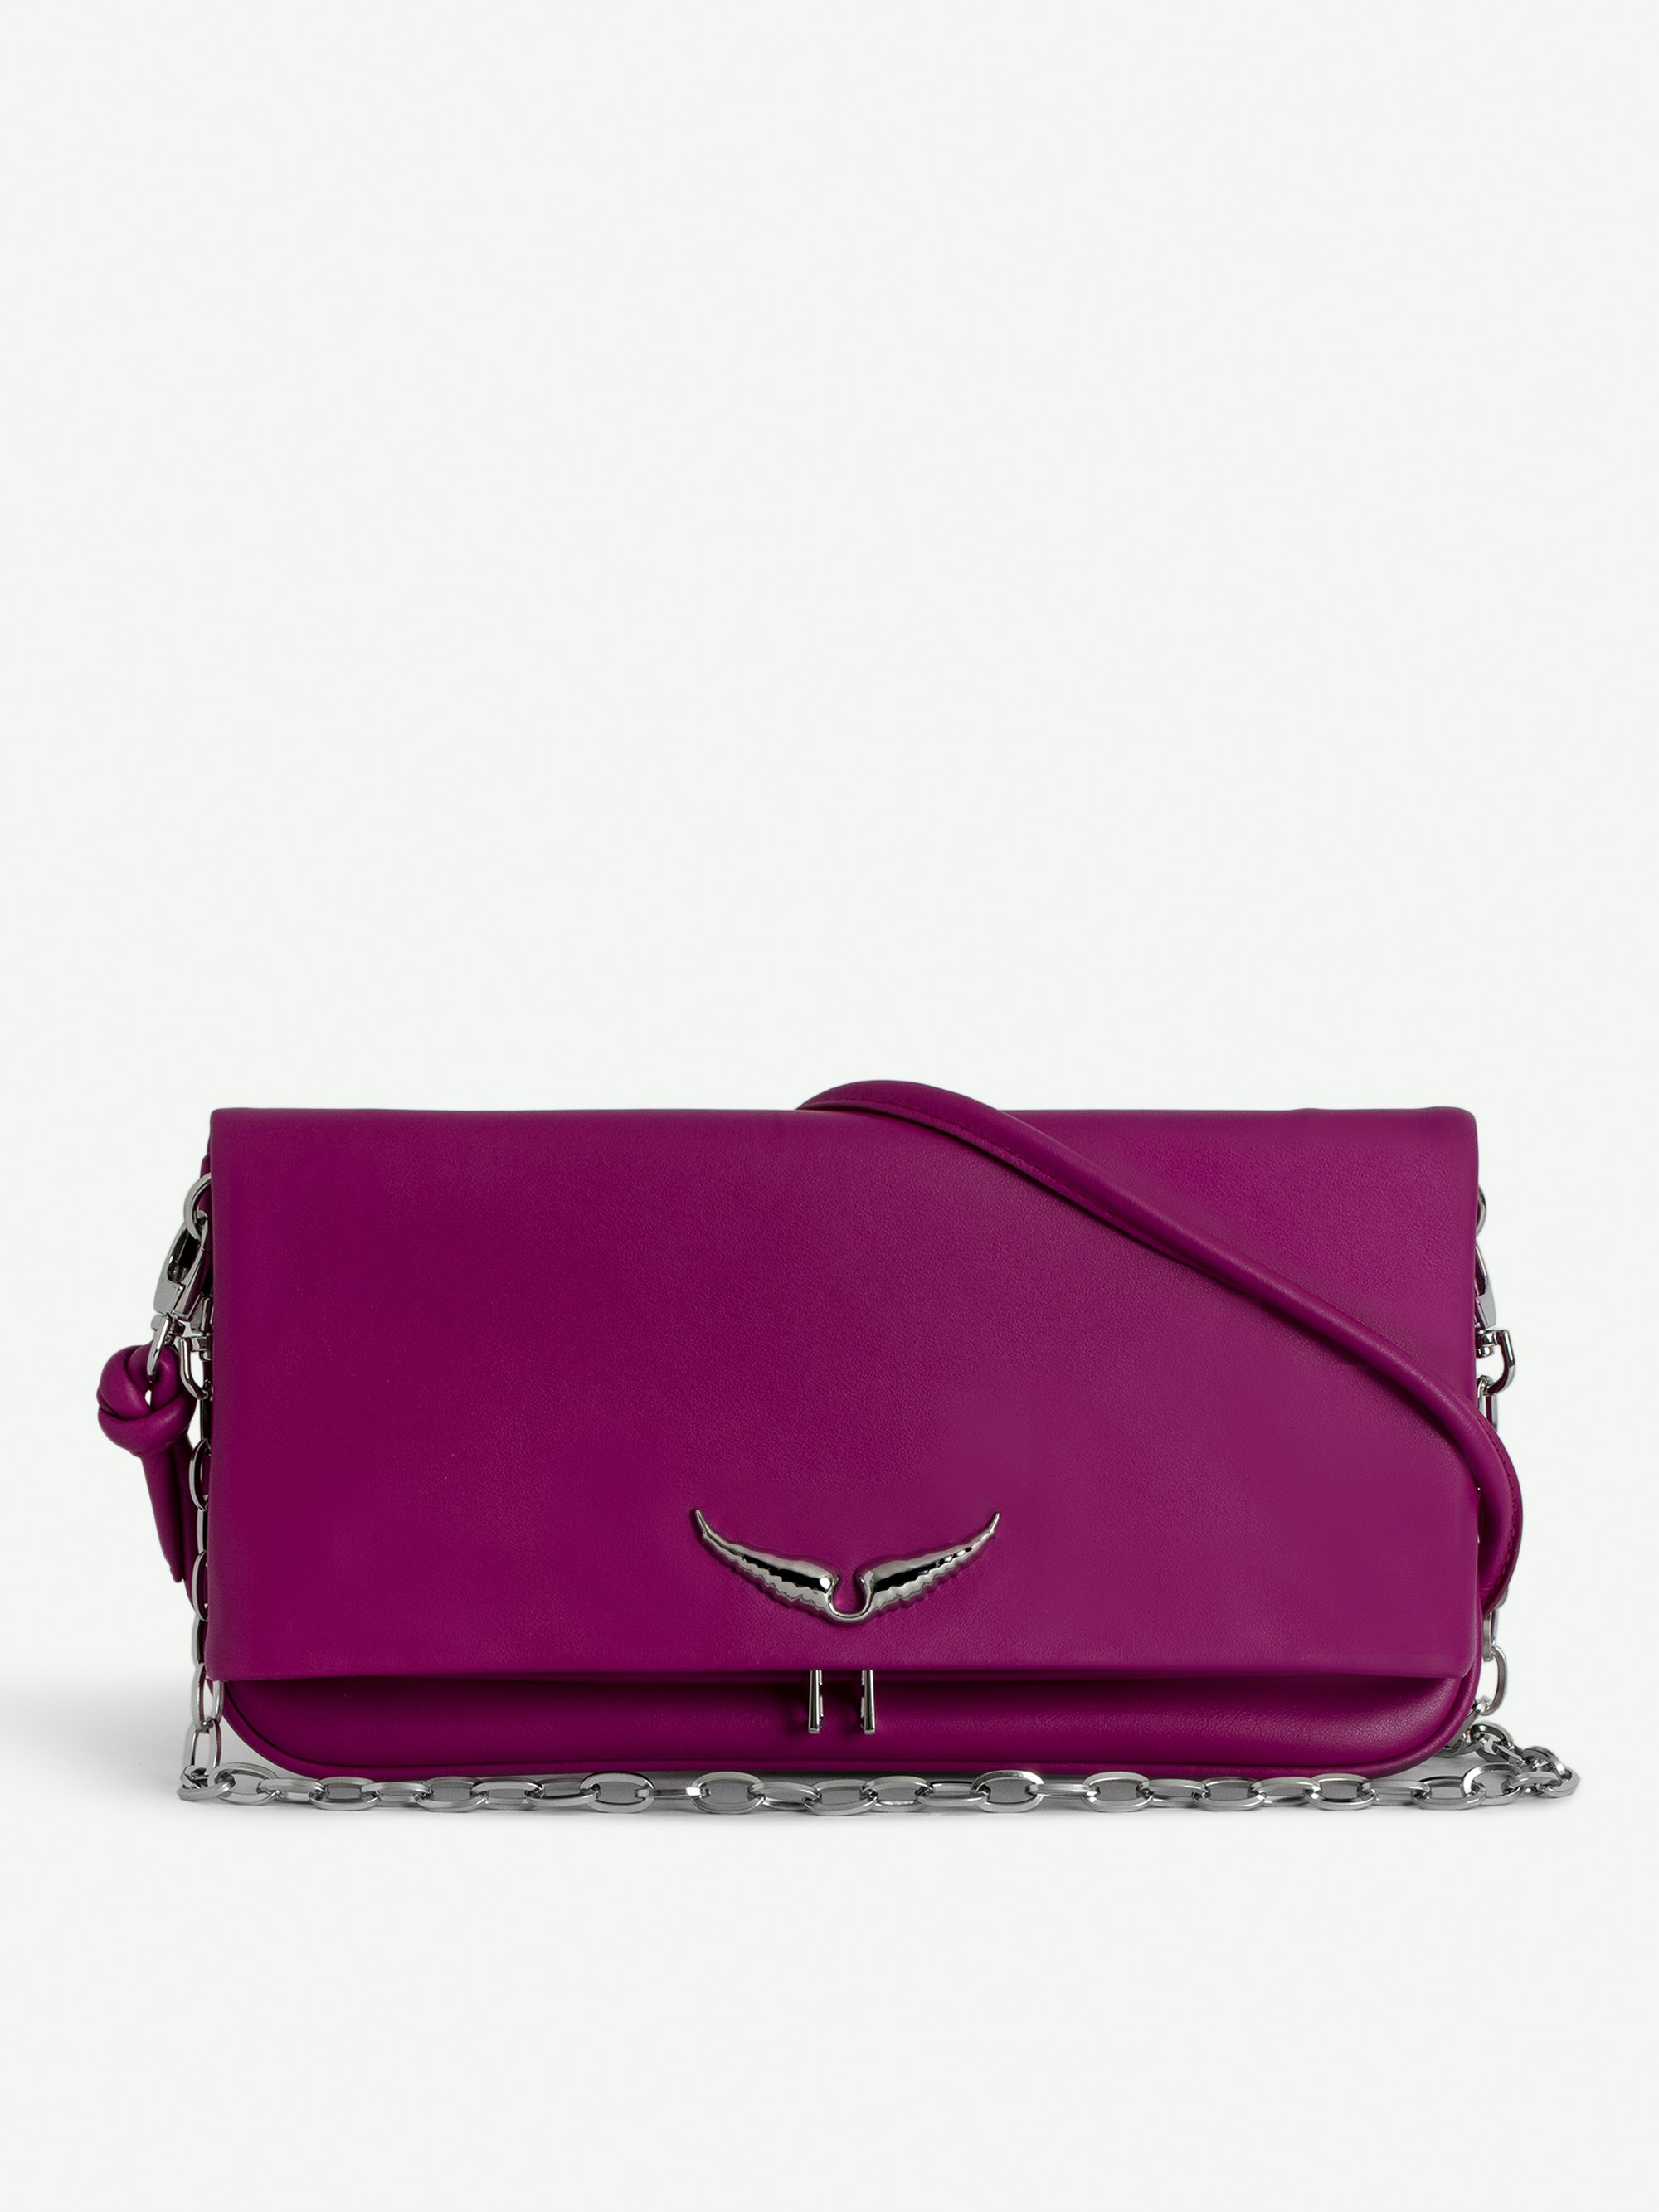 Rock Eternal Clutch - Women’s fuchsia smooth leather clutch with tied shoulder strap, chain and wings.